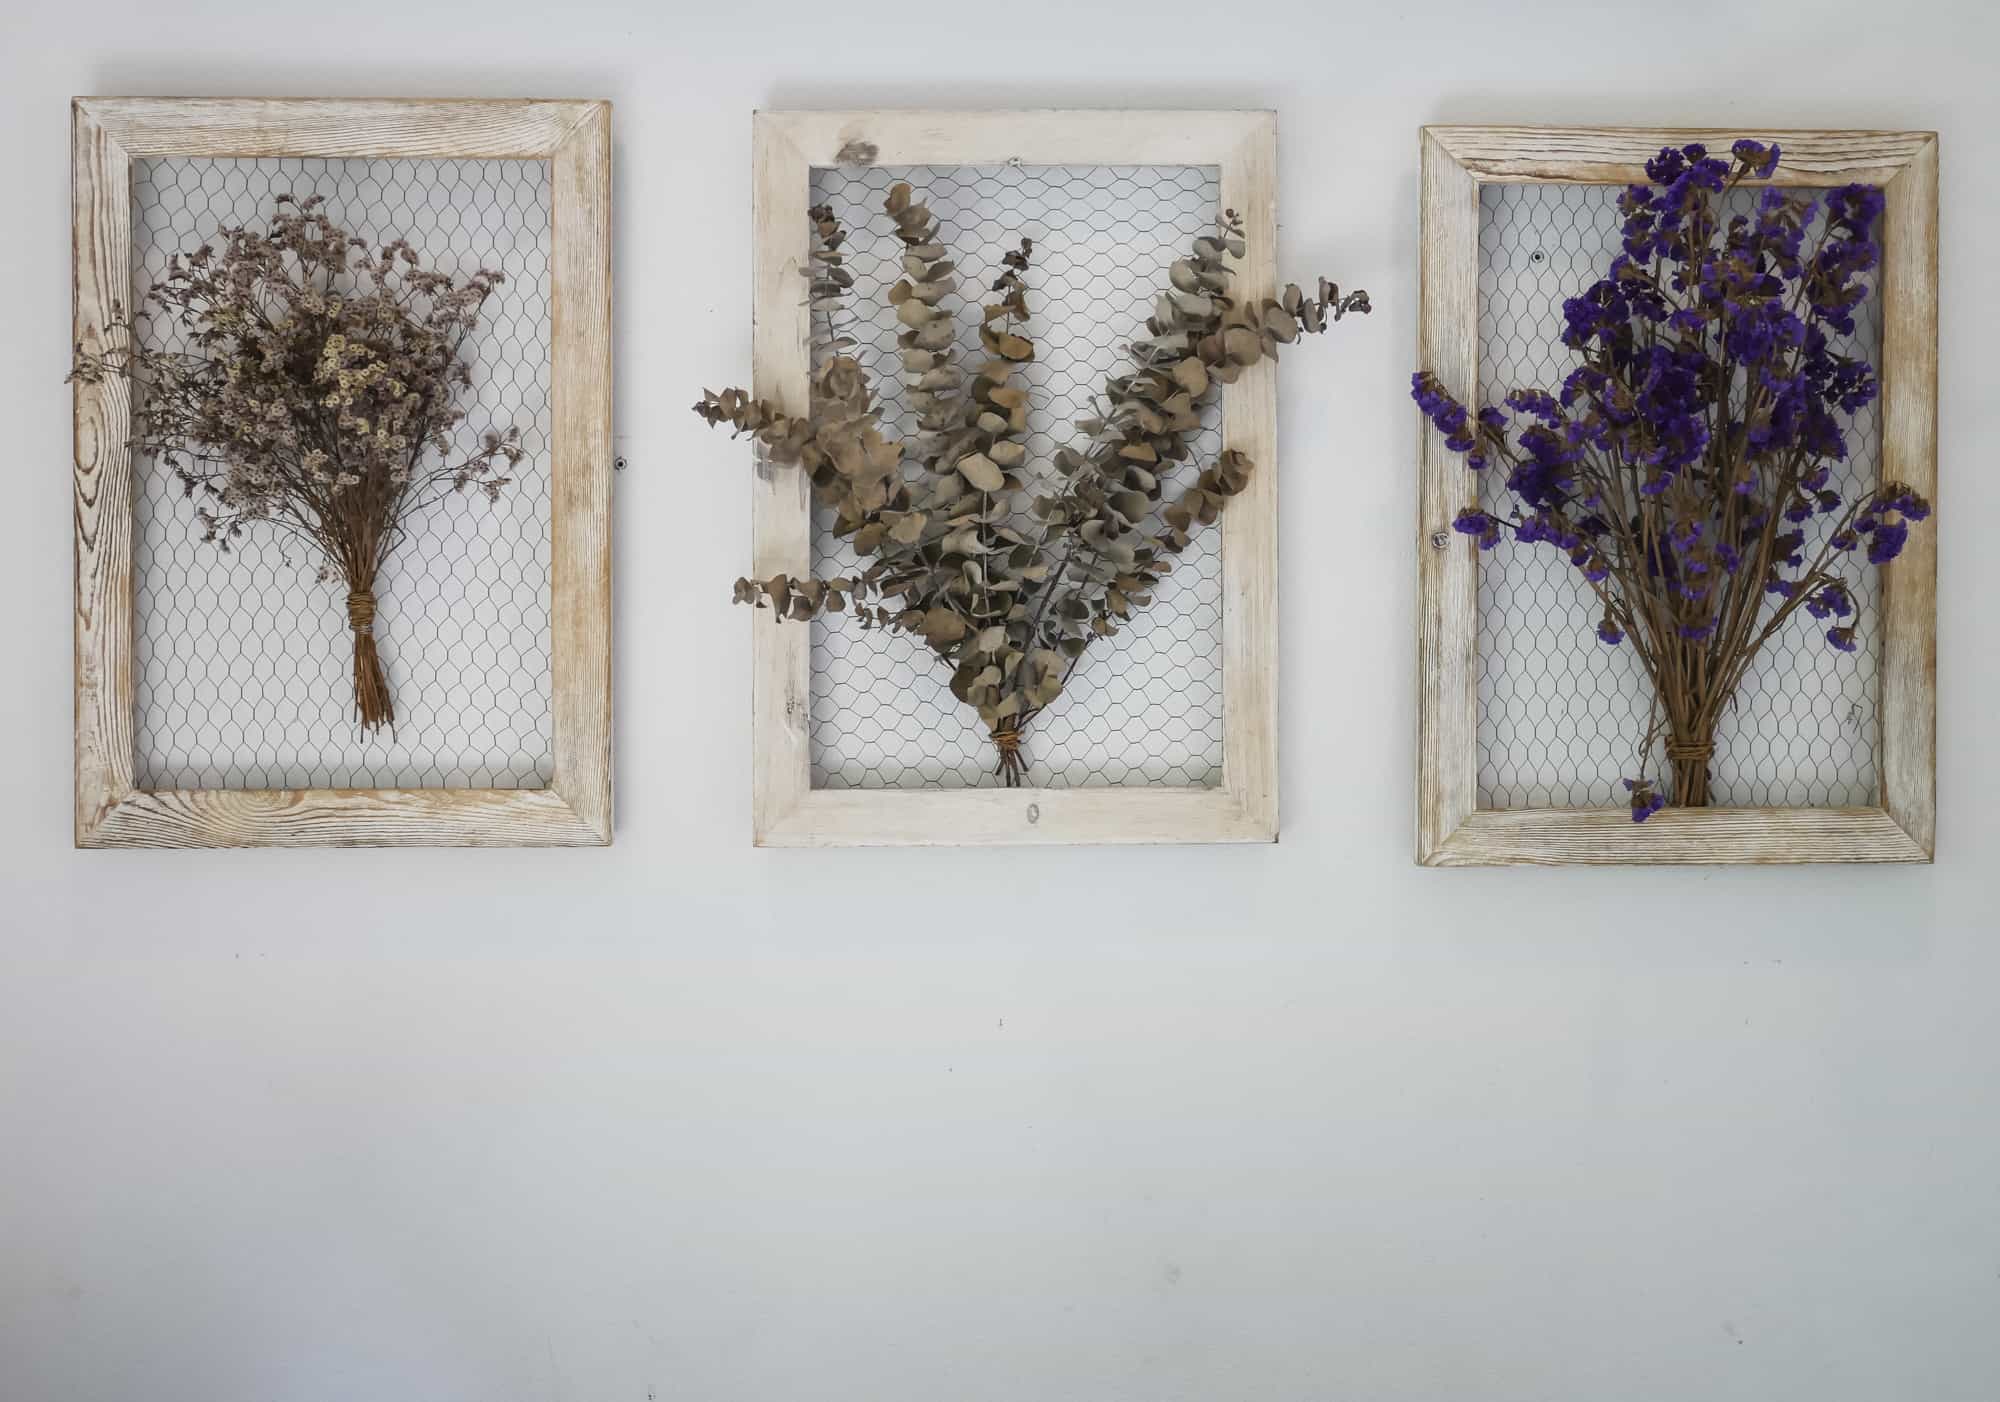 How To Display Dried Flowers In A Frame